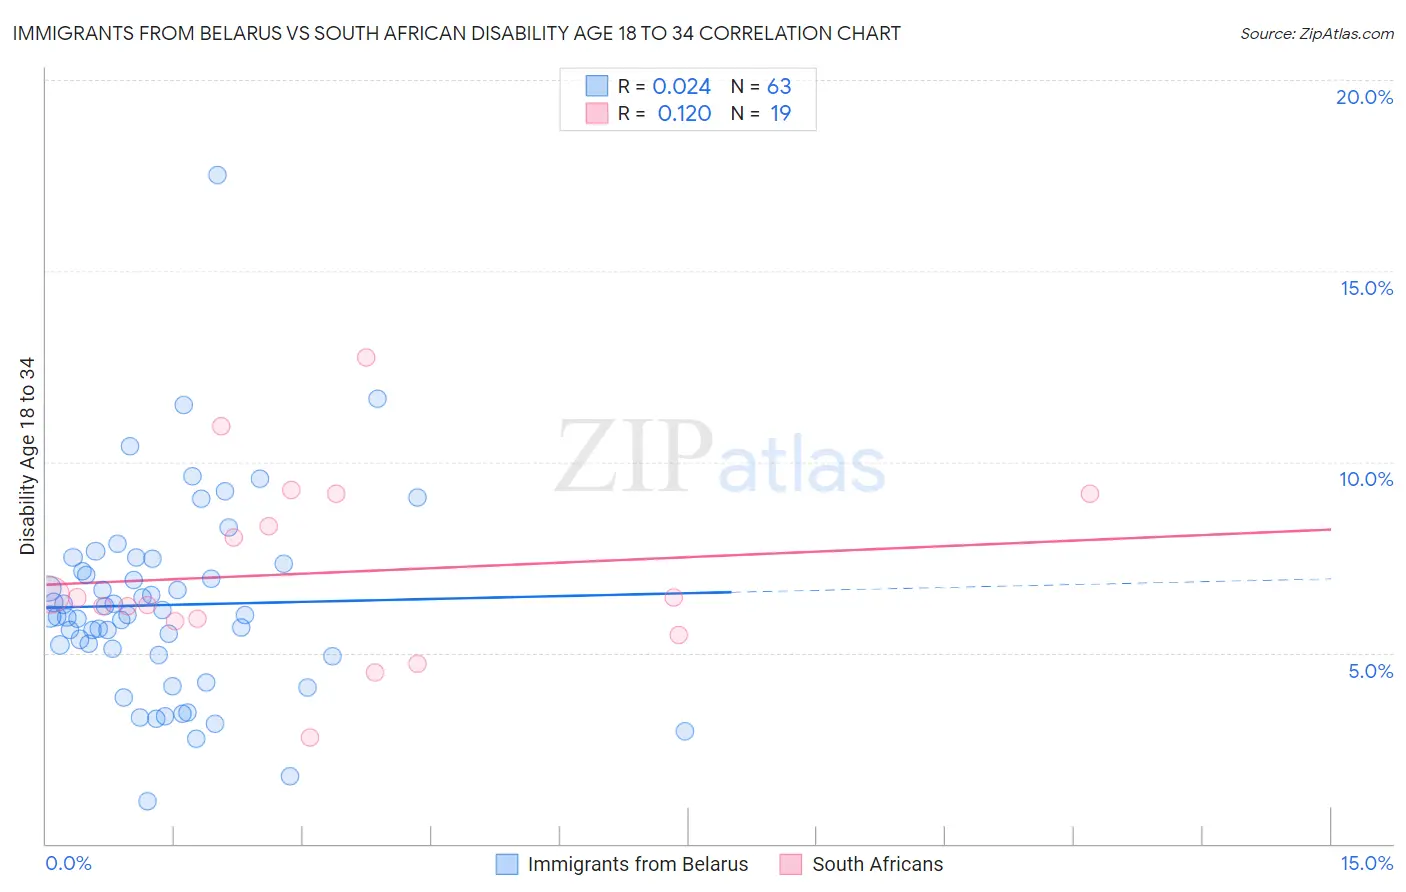 Immigrants from Belarus vs South African Disability Age 18 to 34